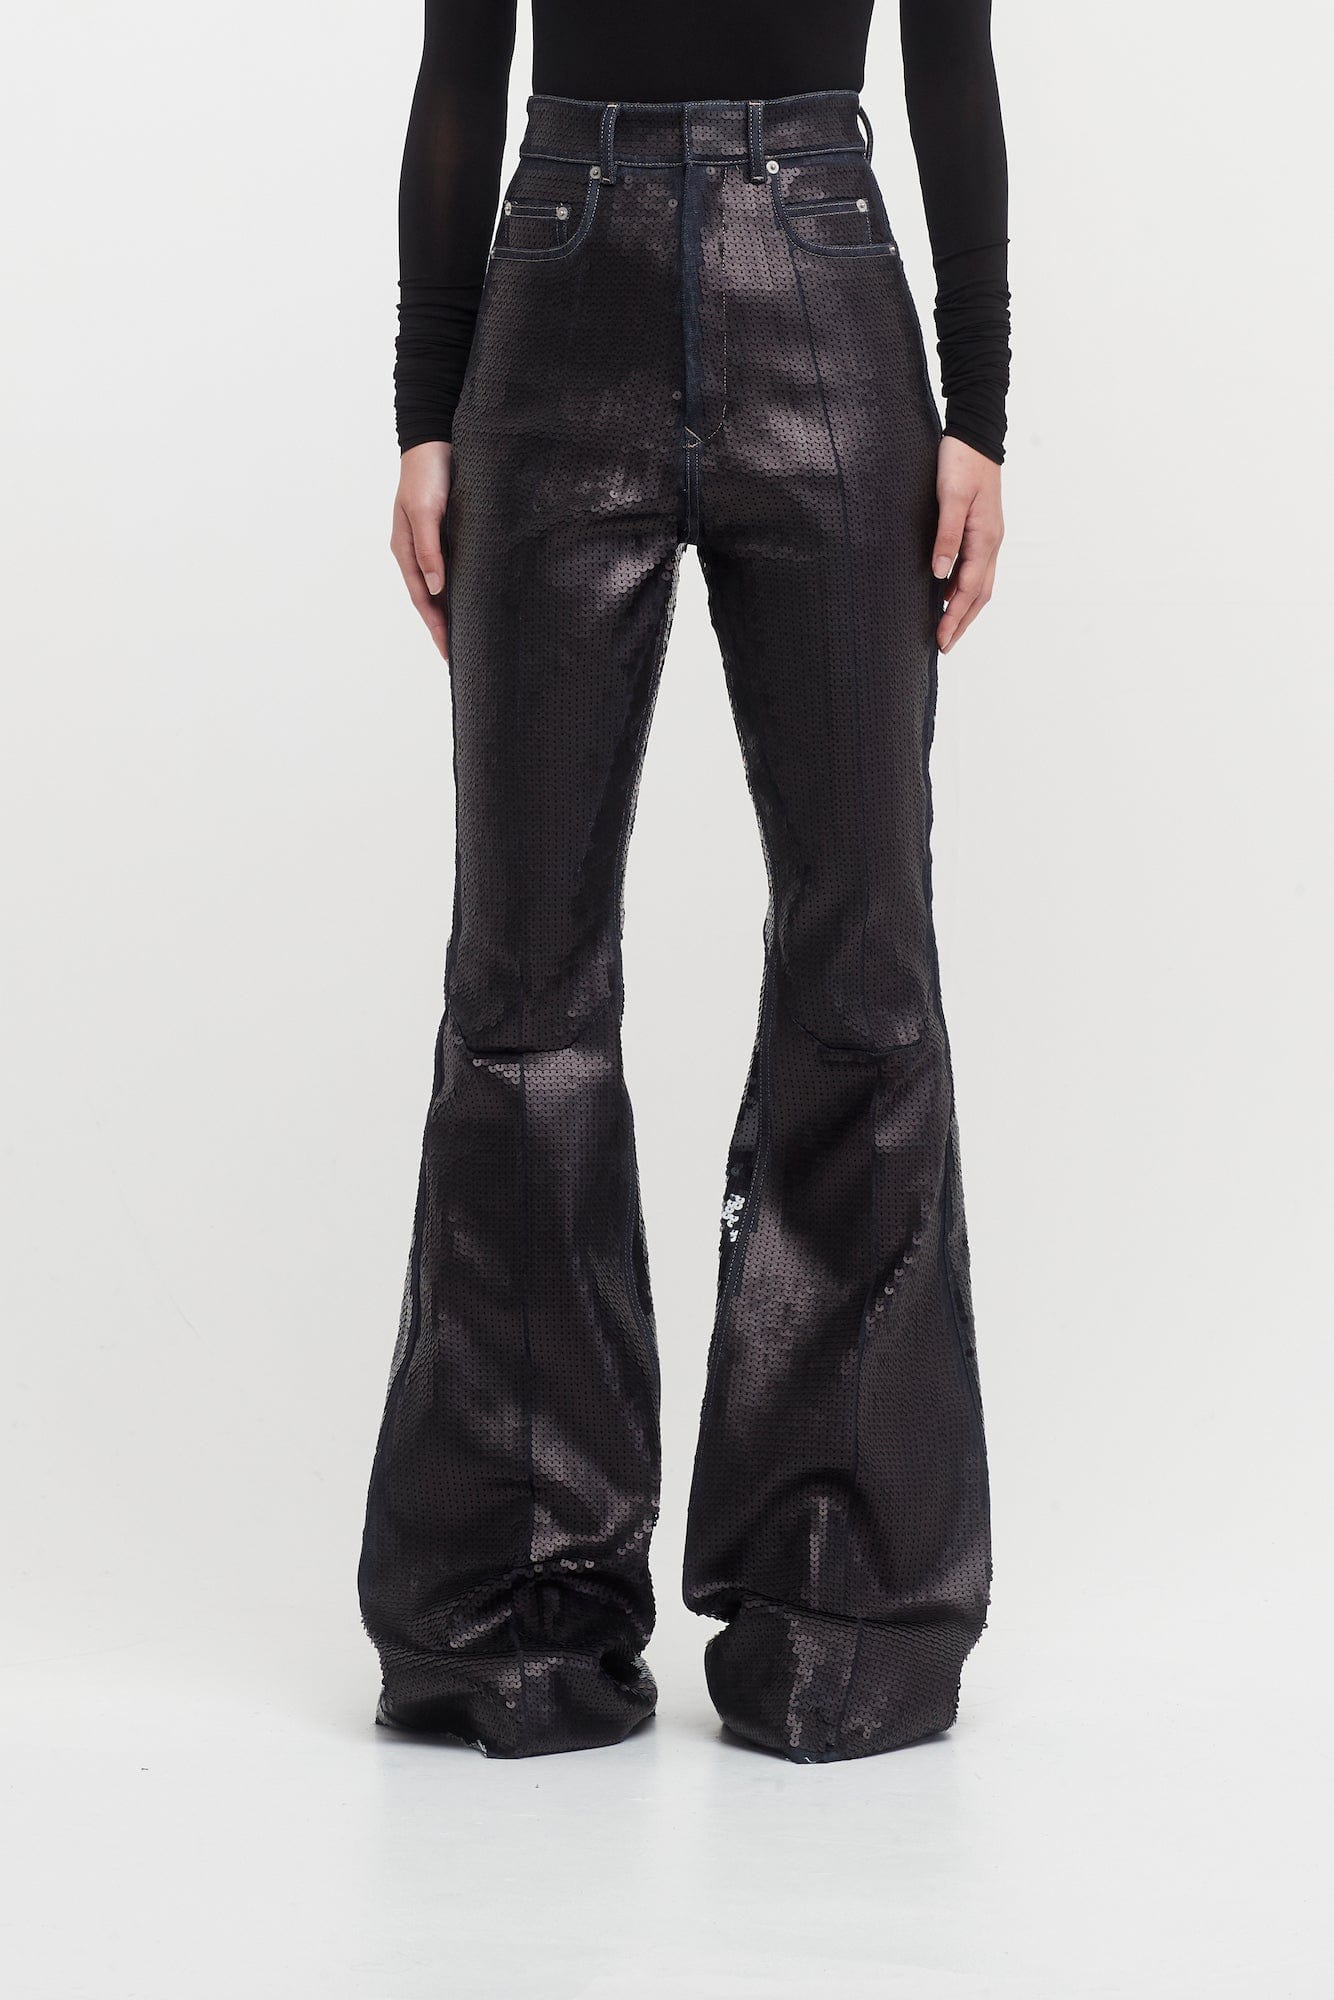 Rick Owens Bolan Denim in Black Sequin and Blue – Antidote Fashion